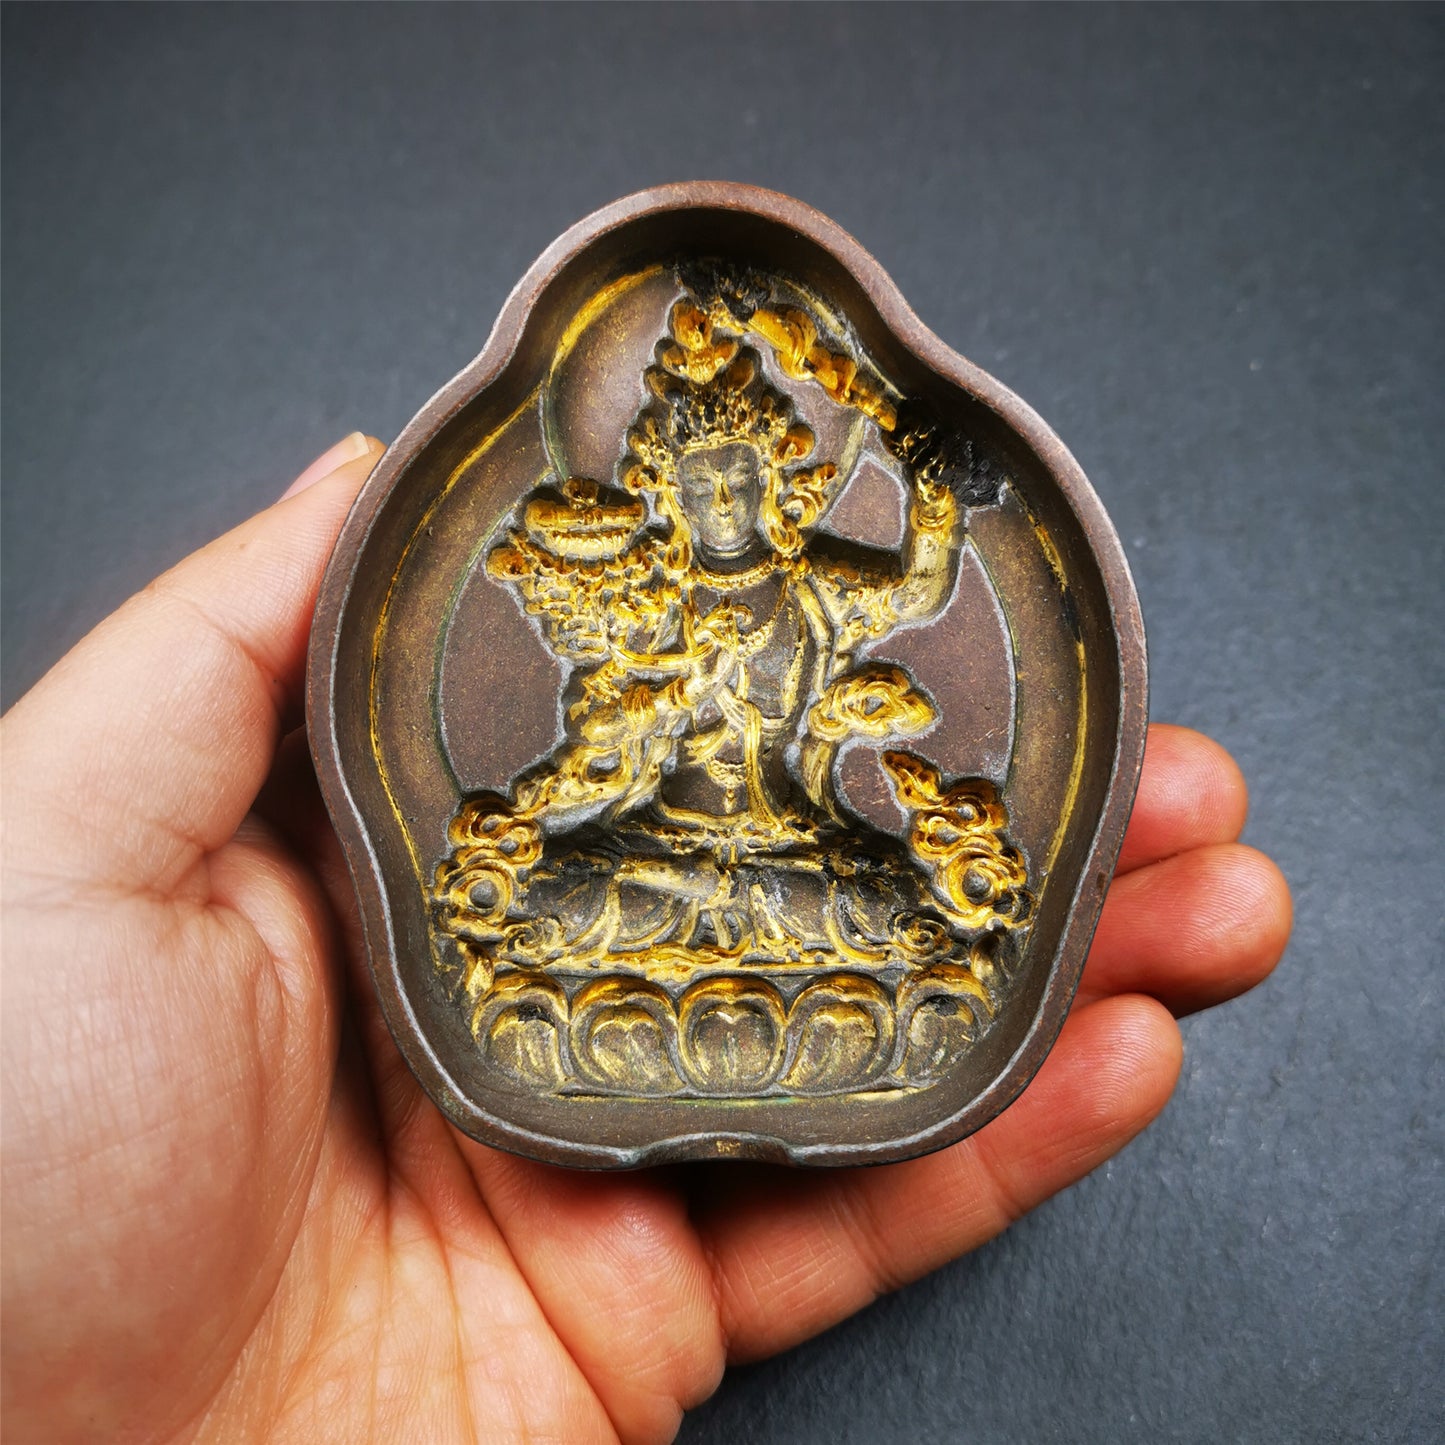 This unique Manjusri Tsa-Tsa buddha statue mold is made by Tibetan craftsmen in Hepo Township, Baiyu County. With this exquisite mold, you can use clay to make your own Buddha statue as a decoration or consecration. The statue that you make from your moulds can be left plain or painted.